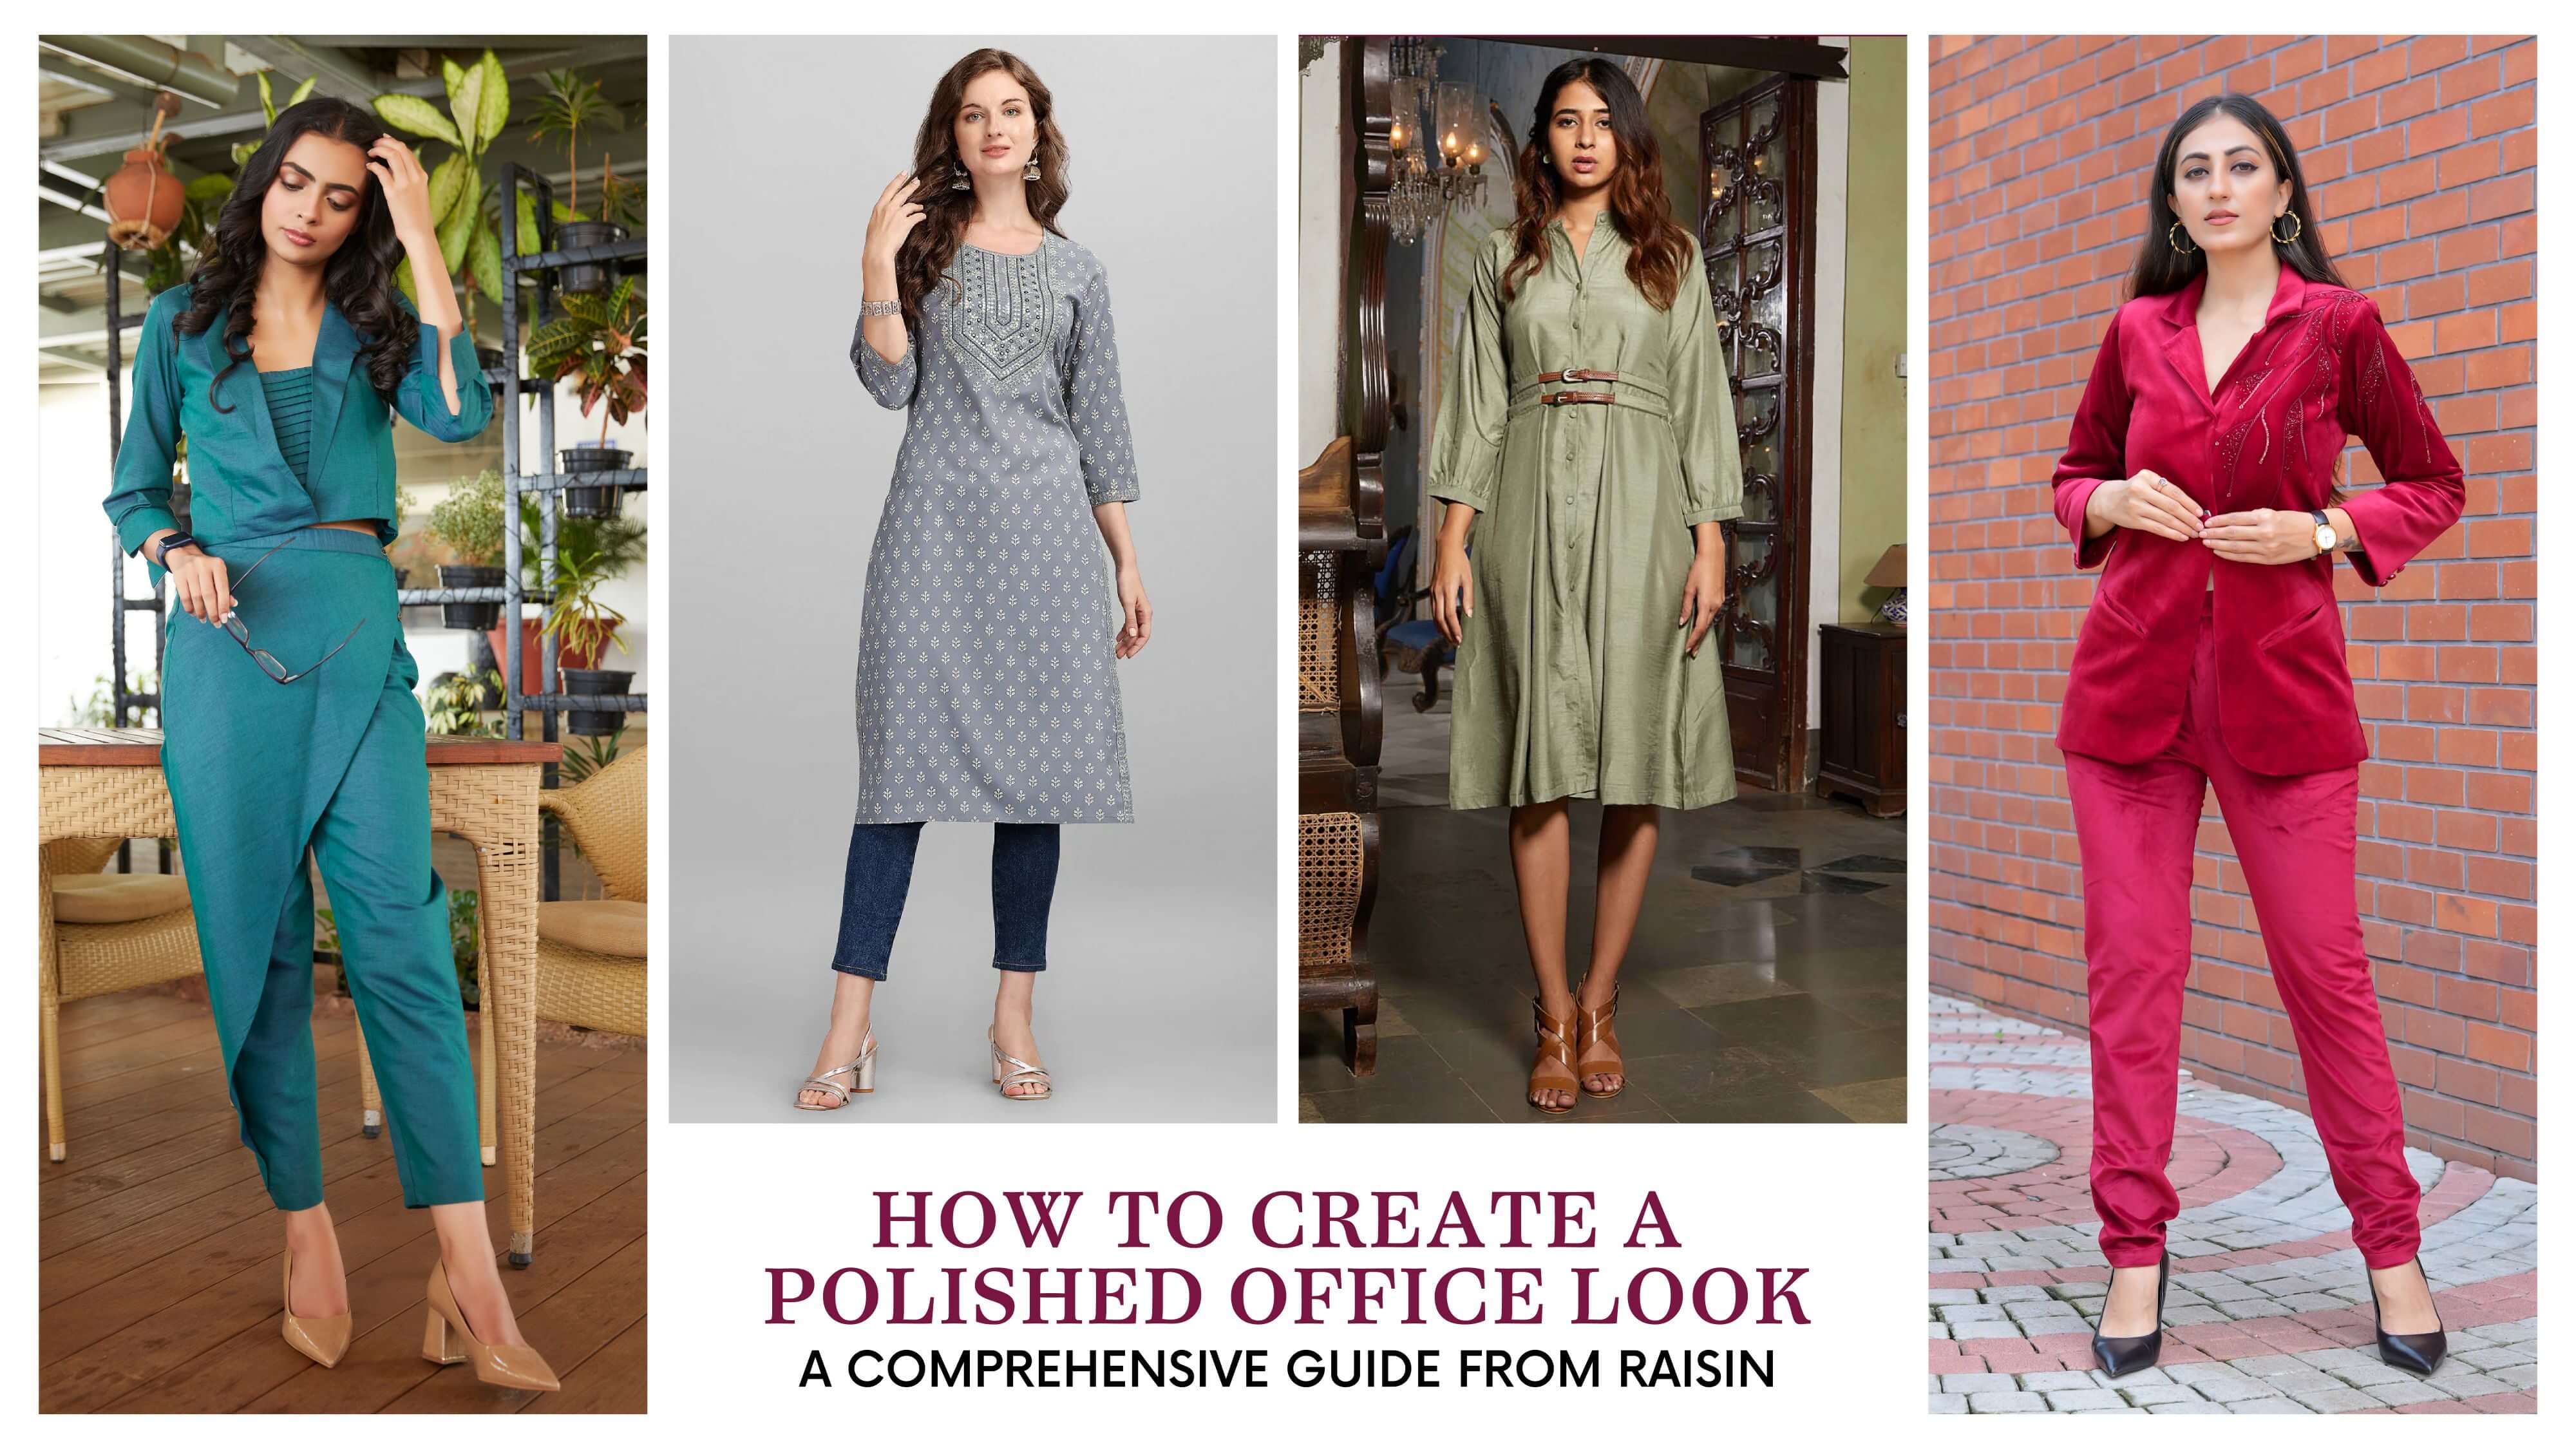 How To Create A Polished Office Look: A Comprehensive Guide From Raisin